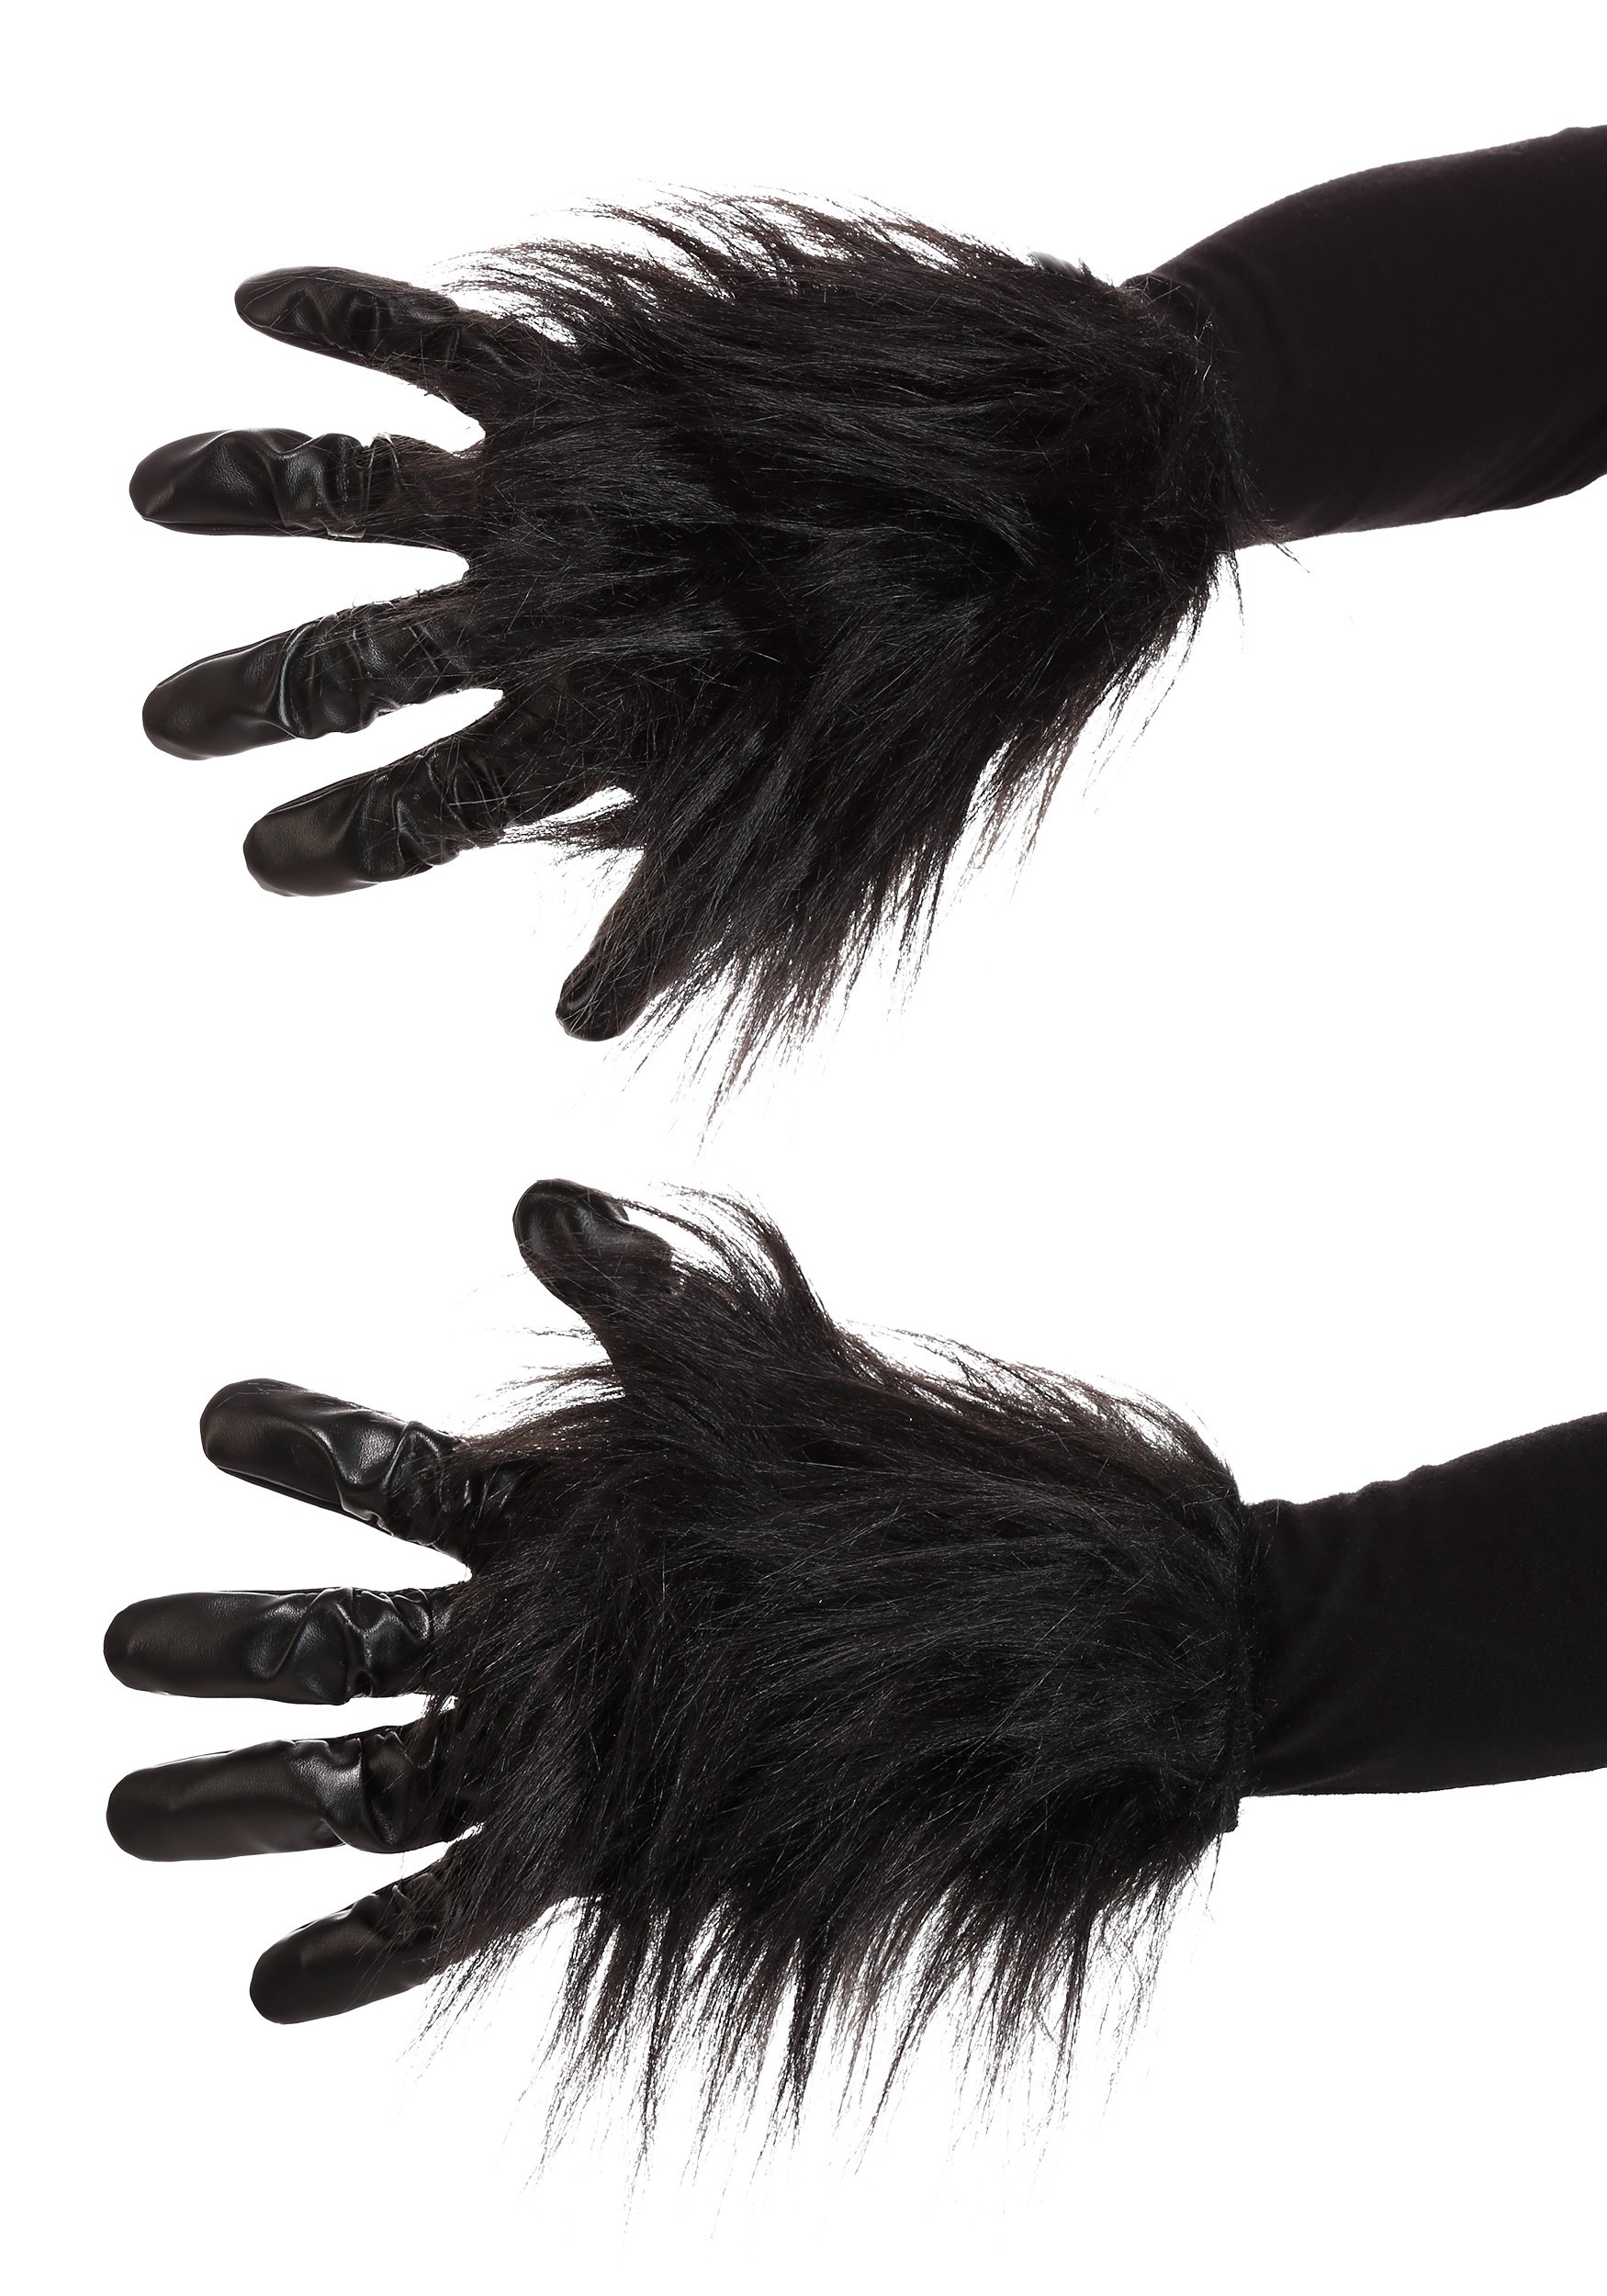 https://images.fun.com/products/45026/1-1/gorilla-gloves-adult-.jpg